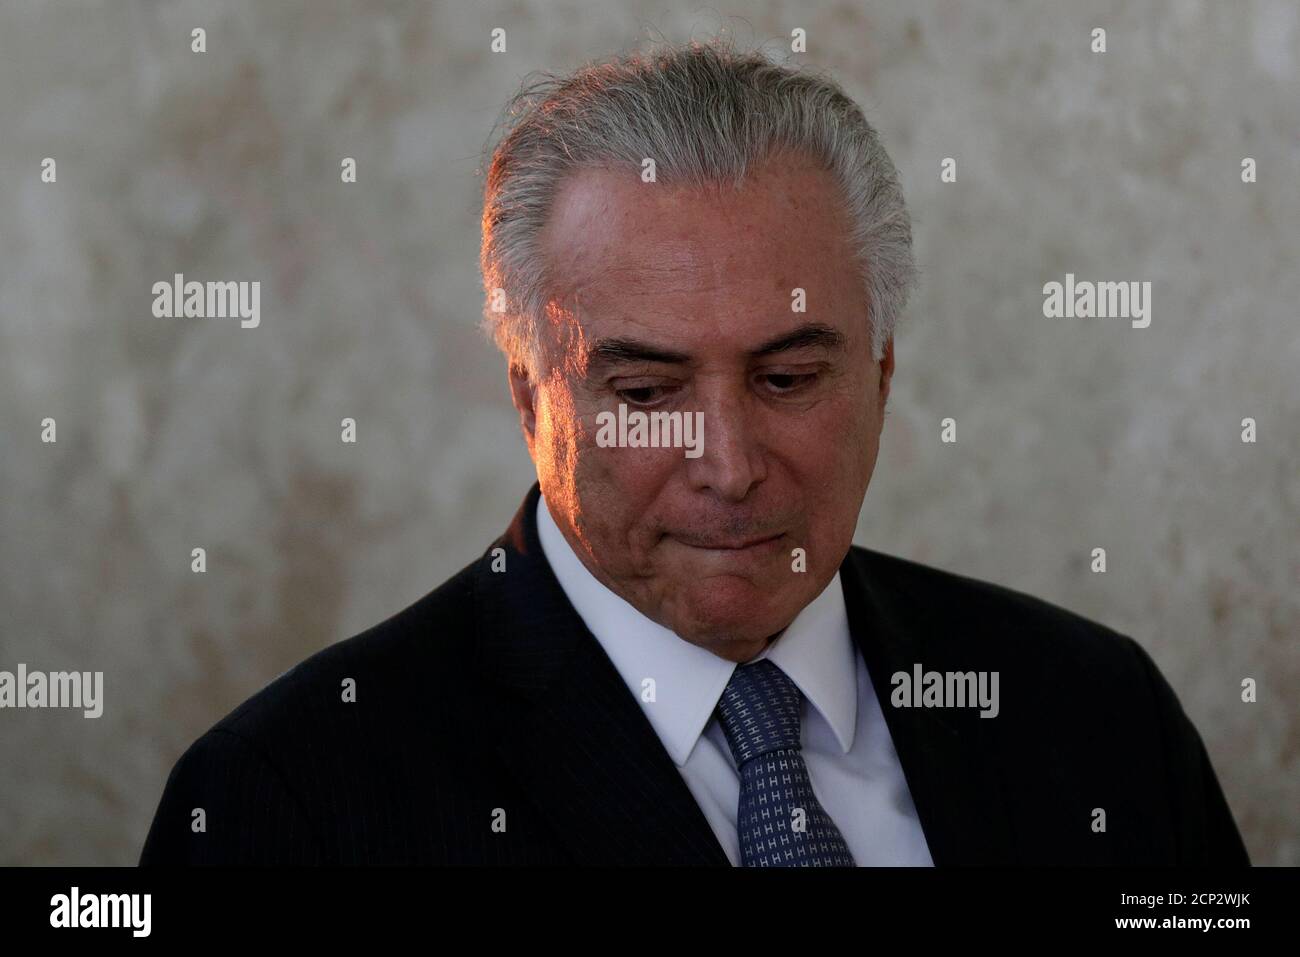 Brazil's President Michel Temer reacts during launch ceremony of the 'New School' (Novo Ensino Medio) at the Presidential Palace in Brasilia, Brazil, September 22, 2016. REUTERS/Ueslei Marcelino Stock Photo